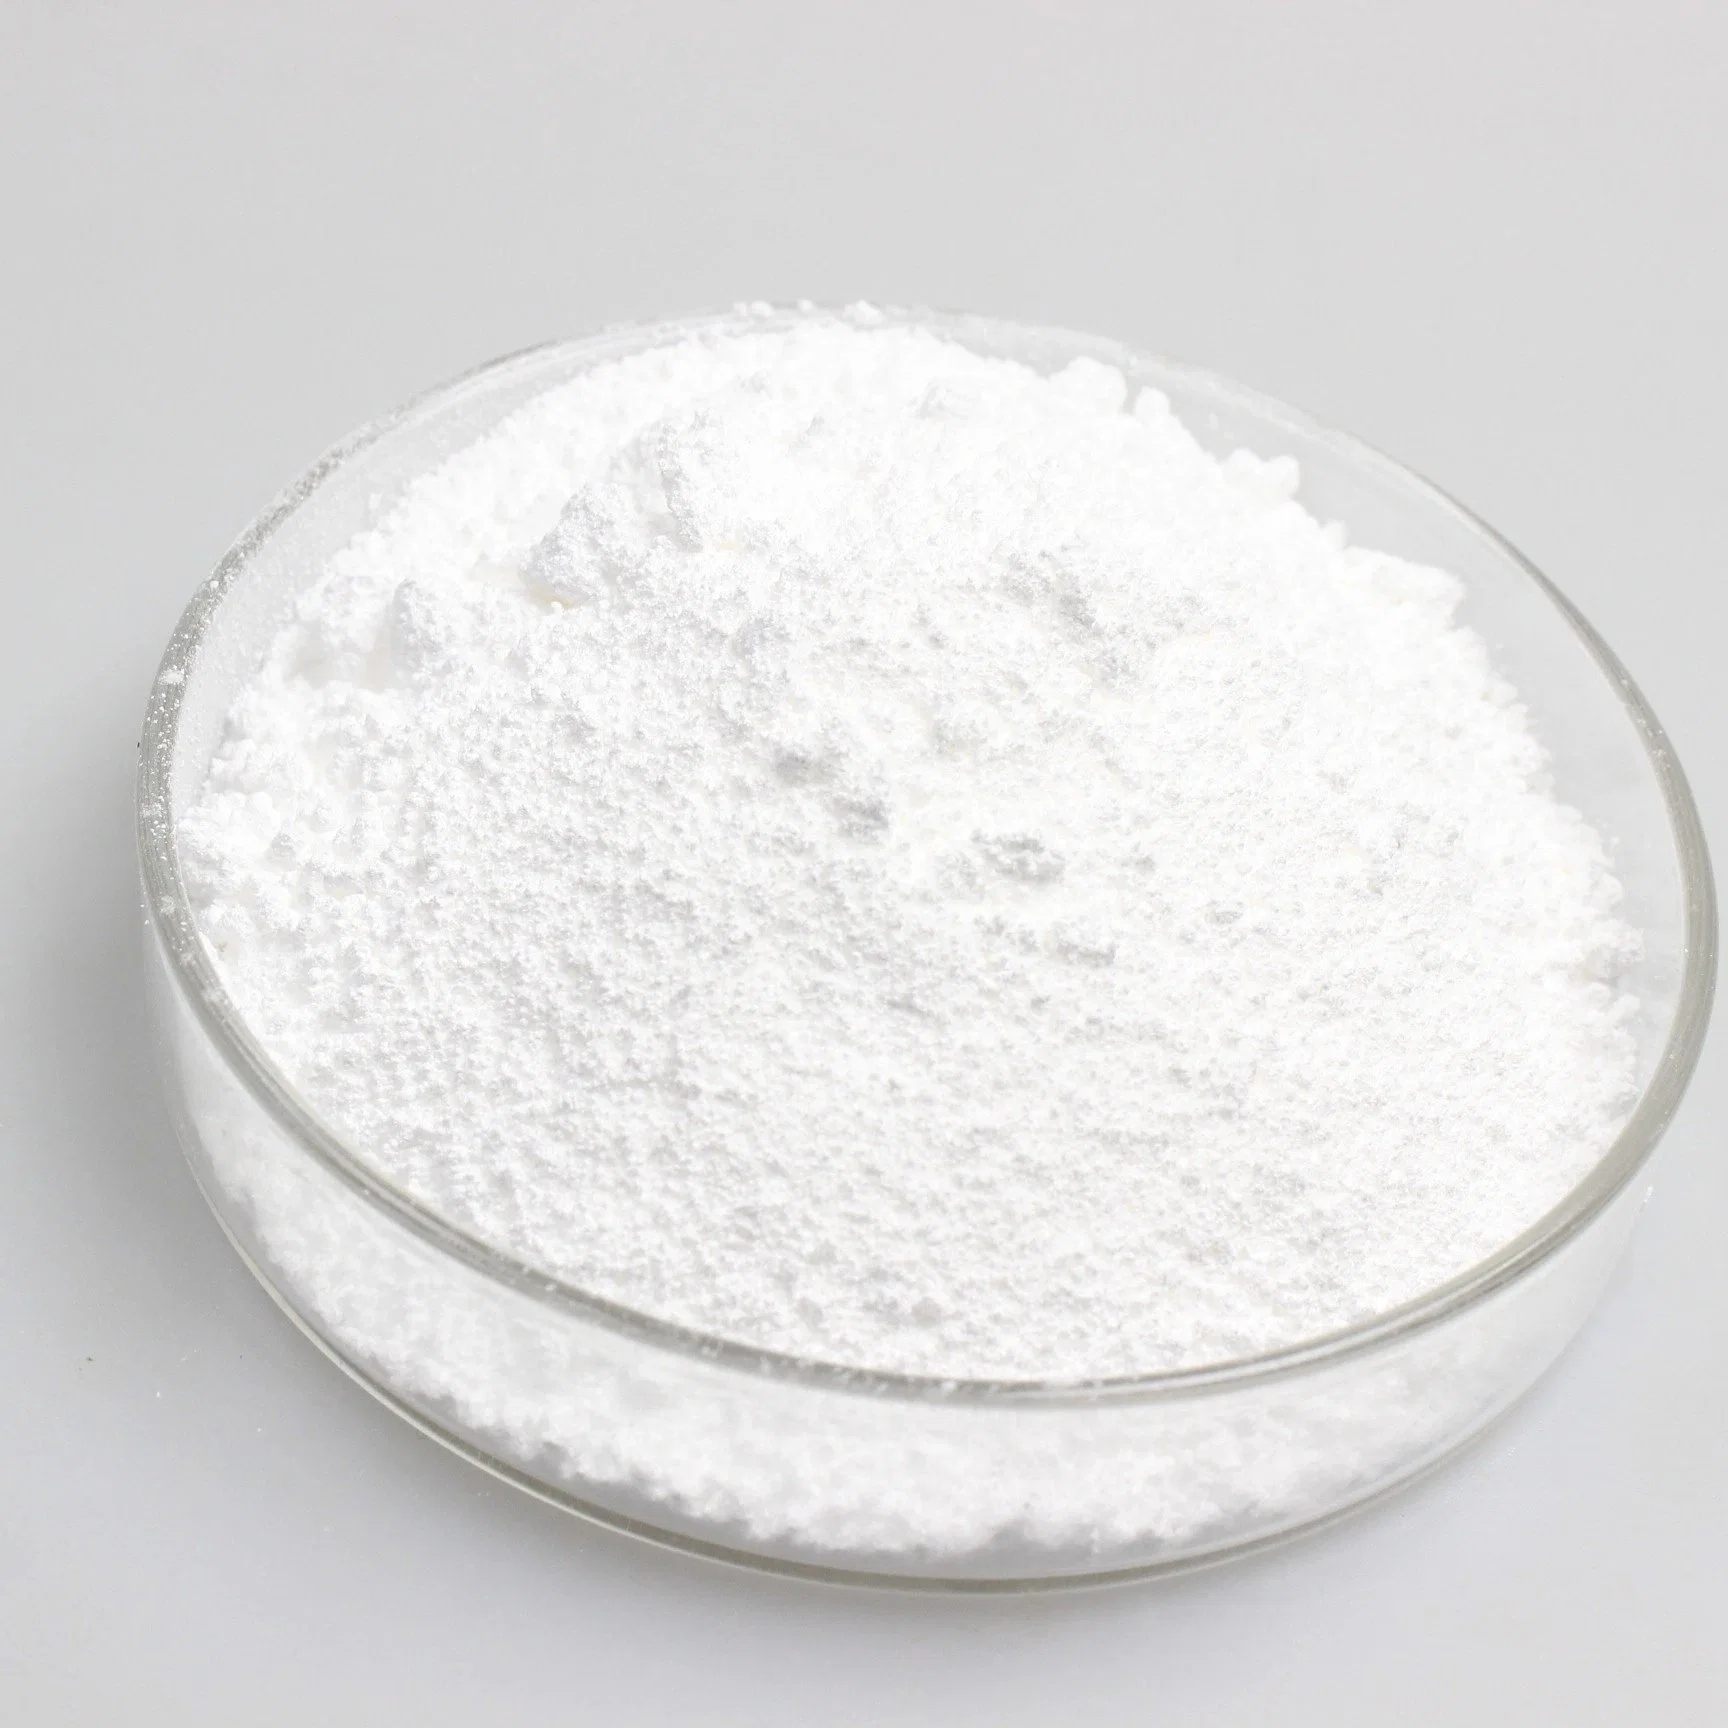 High quality/High cost performance  Best Manufactory Price Licl Anhydrous Lithium Chloride for Sale CAS 7447-41-8 Salt Reagent Battery Grade